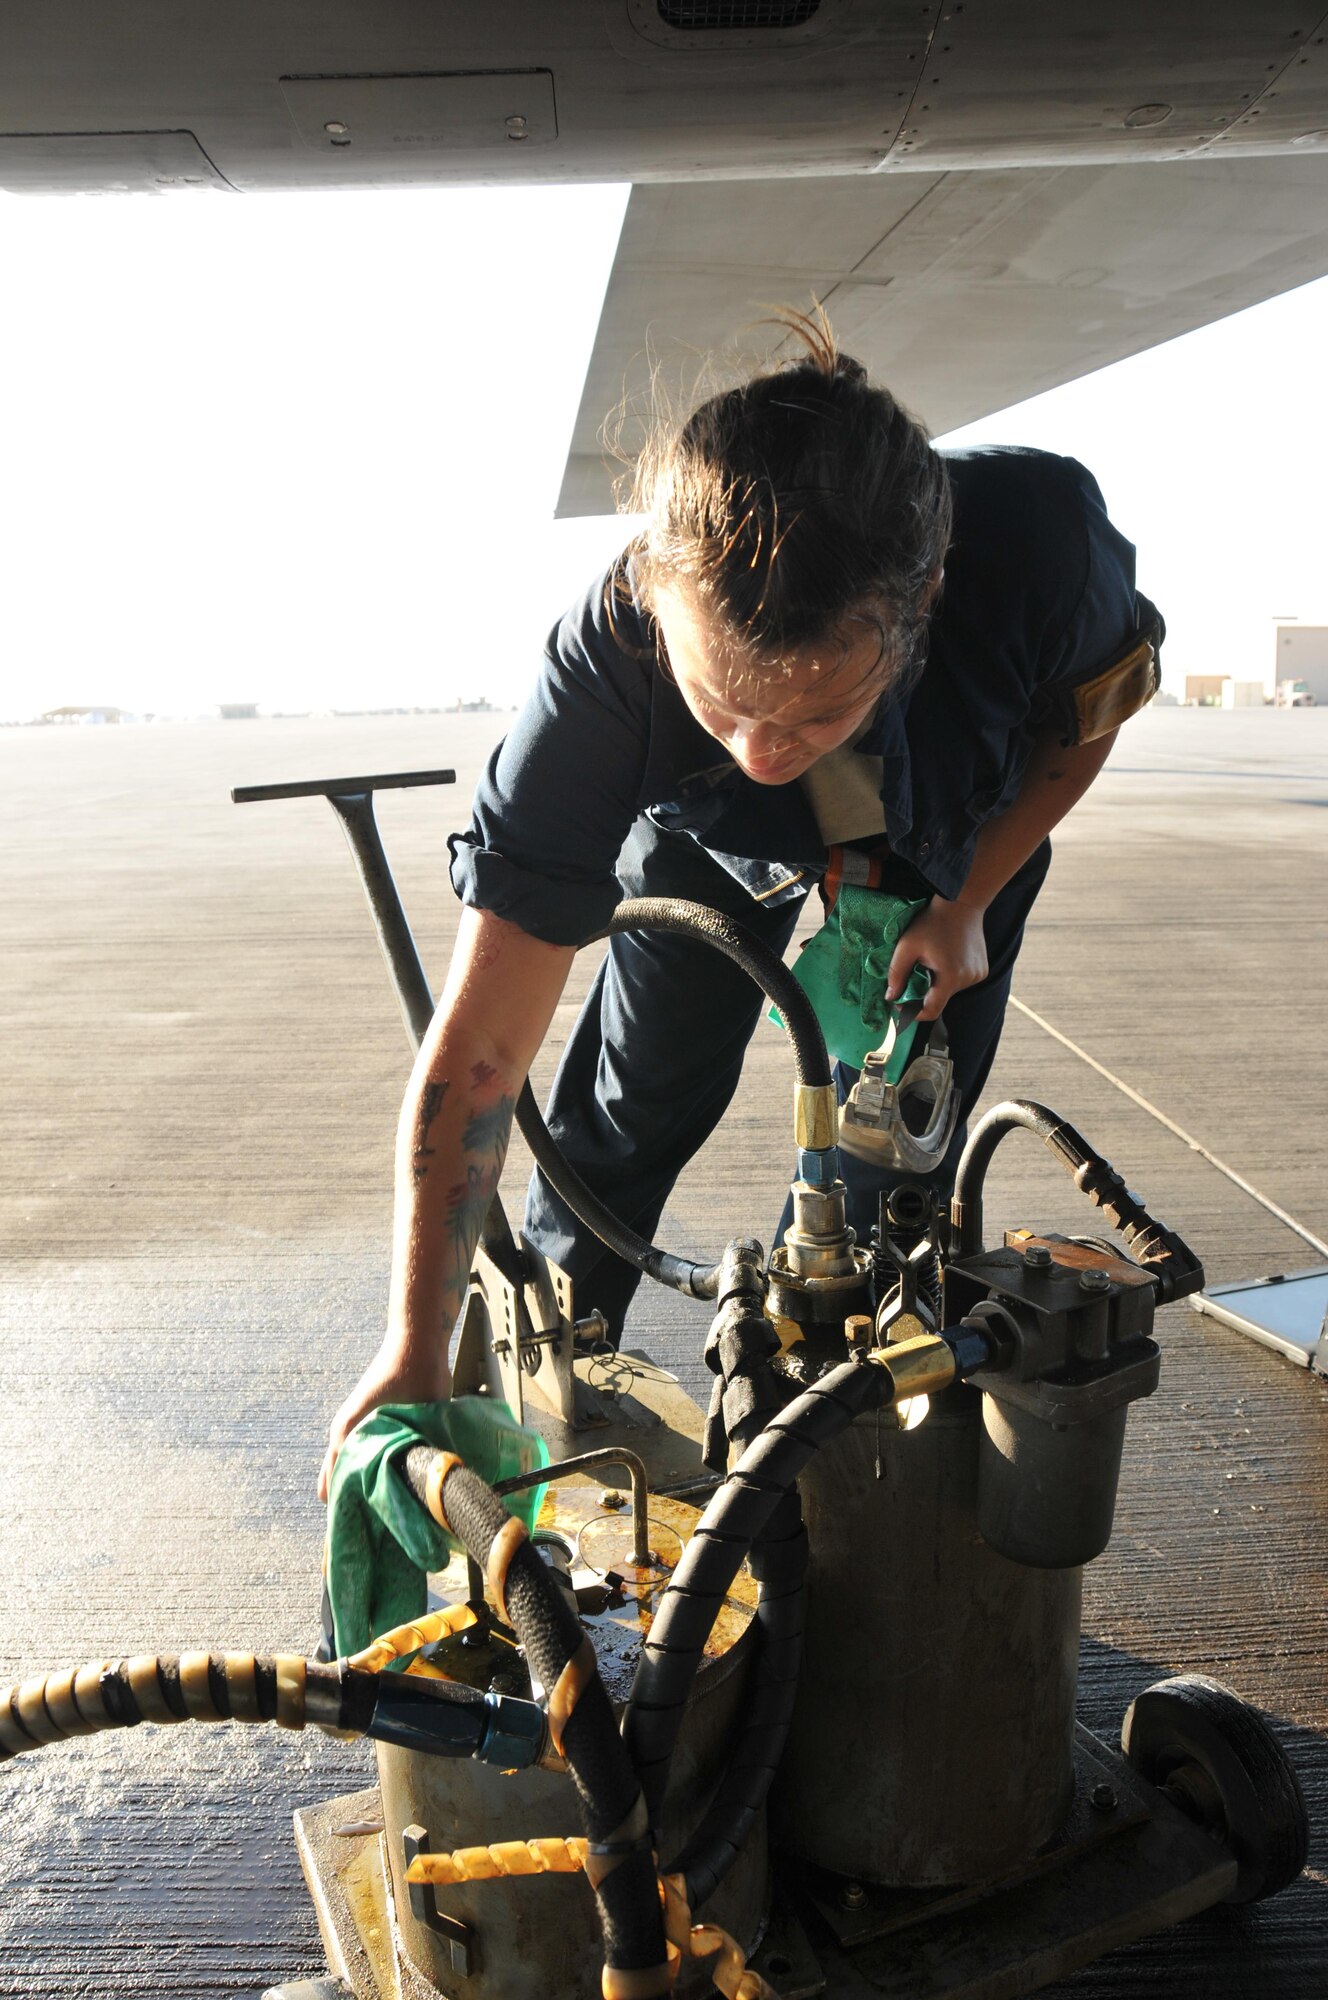 Senior Airman Alexis Anderson, 379th Expeditionary Aircraft Maintenance Squadron crew chief, performs a post-flight inspection on a B-1 B Lancer Jan. 11 at Al Udeid Air Base, Qatar. After a B-1 mission is complete, Anderson and other maintainers, perform several post flight inspections to ensure the aircraft is mission ready. Anderson is deployed from the 307th Expeditionary Aircraft Maintenance Unit at Ellsworth Air Force Base, South Dakota. (U.S. Air Force photo by Tech. Sgt. Terrica Y. Jones/Released)